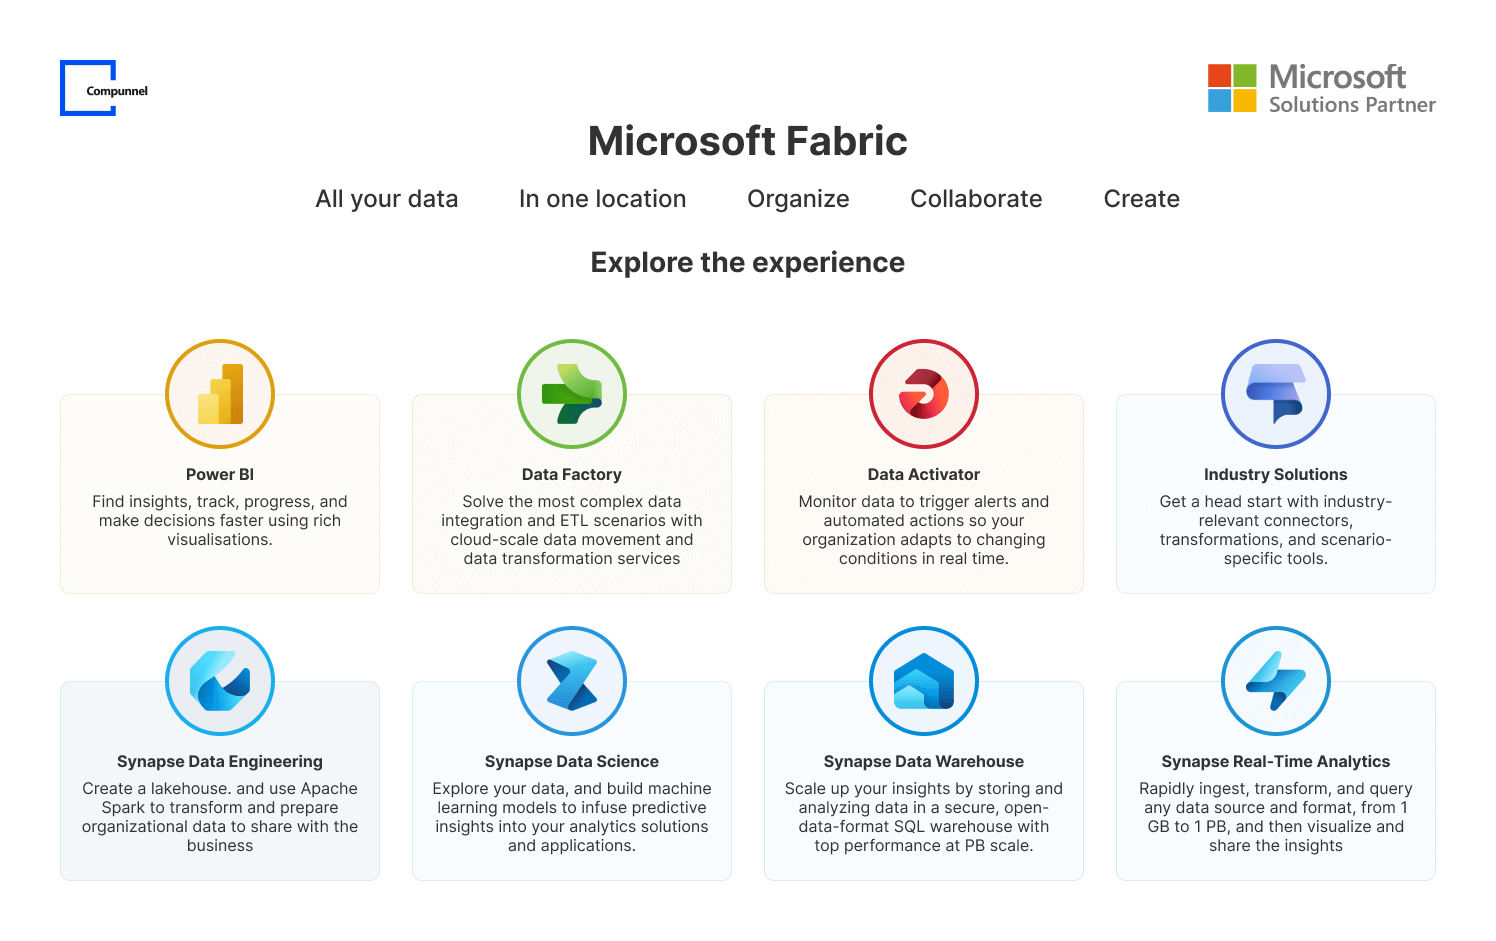 Overview of Microsoft Fabric's capabilities and Compunnel's association as a Microsoft Solutions Partner